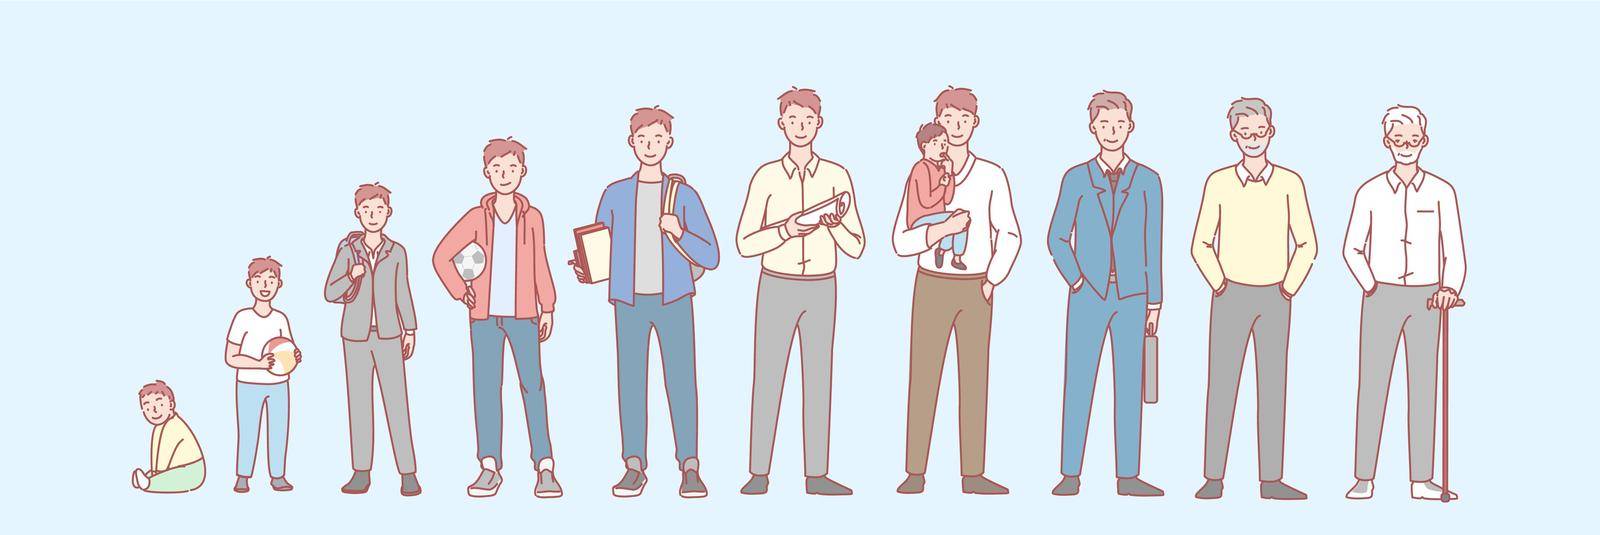 Mans life cycle set concept. Illustration of man in different age from newborn to oldster. Stage of human life collection. Different generations, growing up and aging in cartoon style. Simple vector